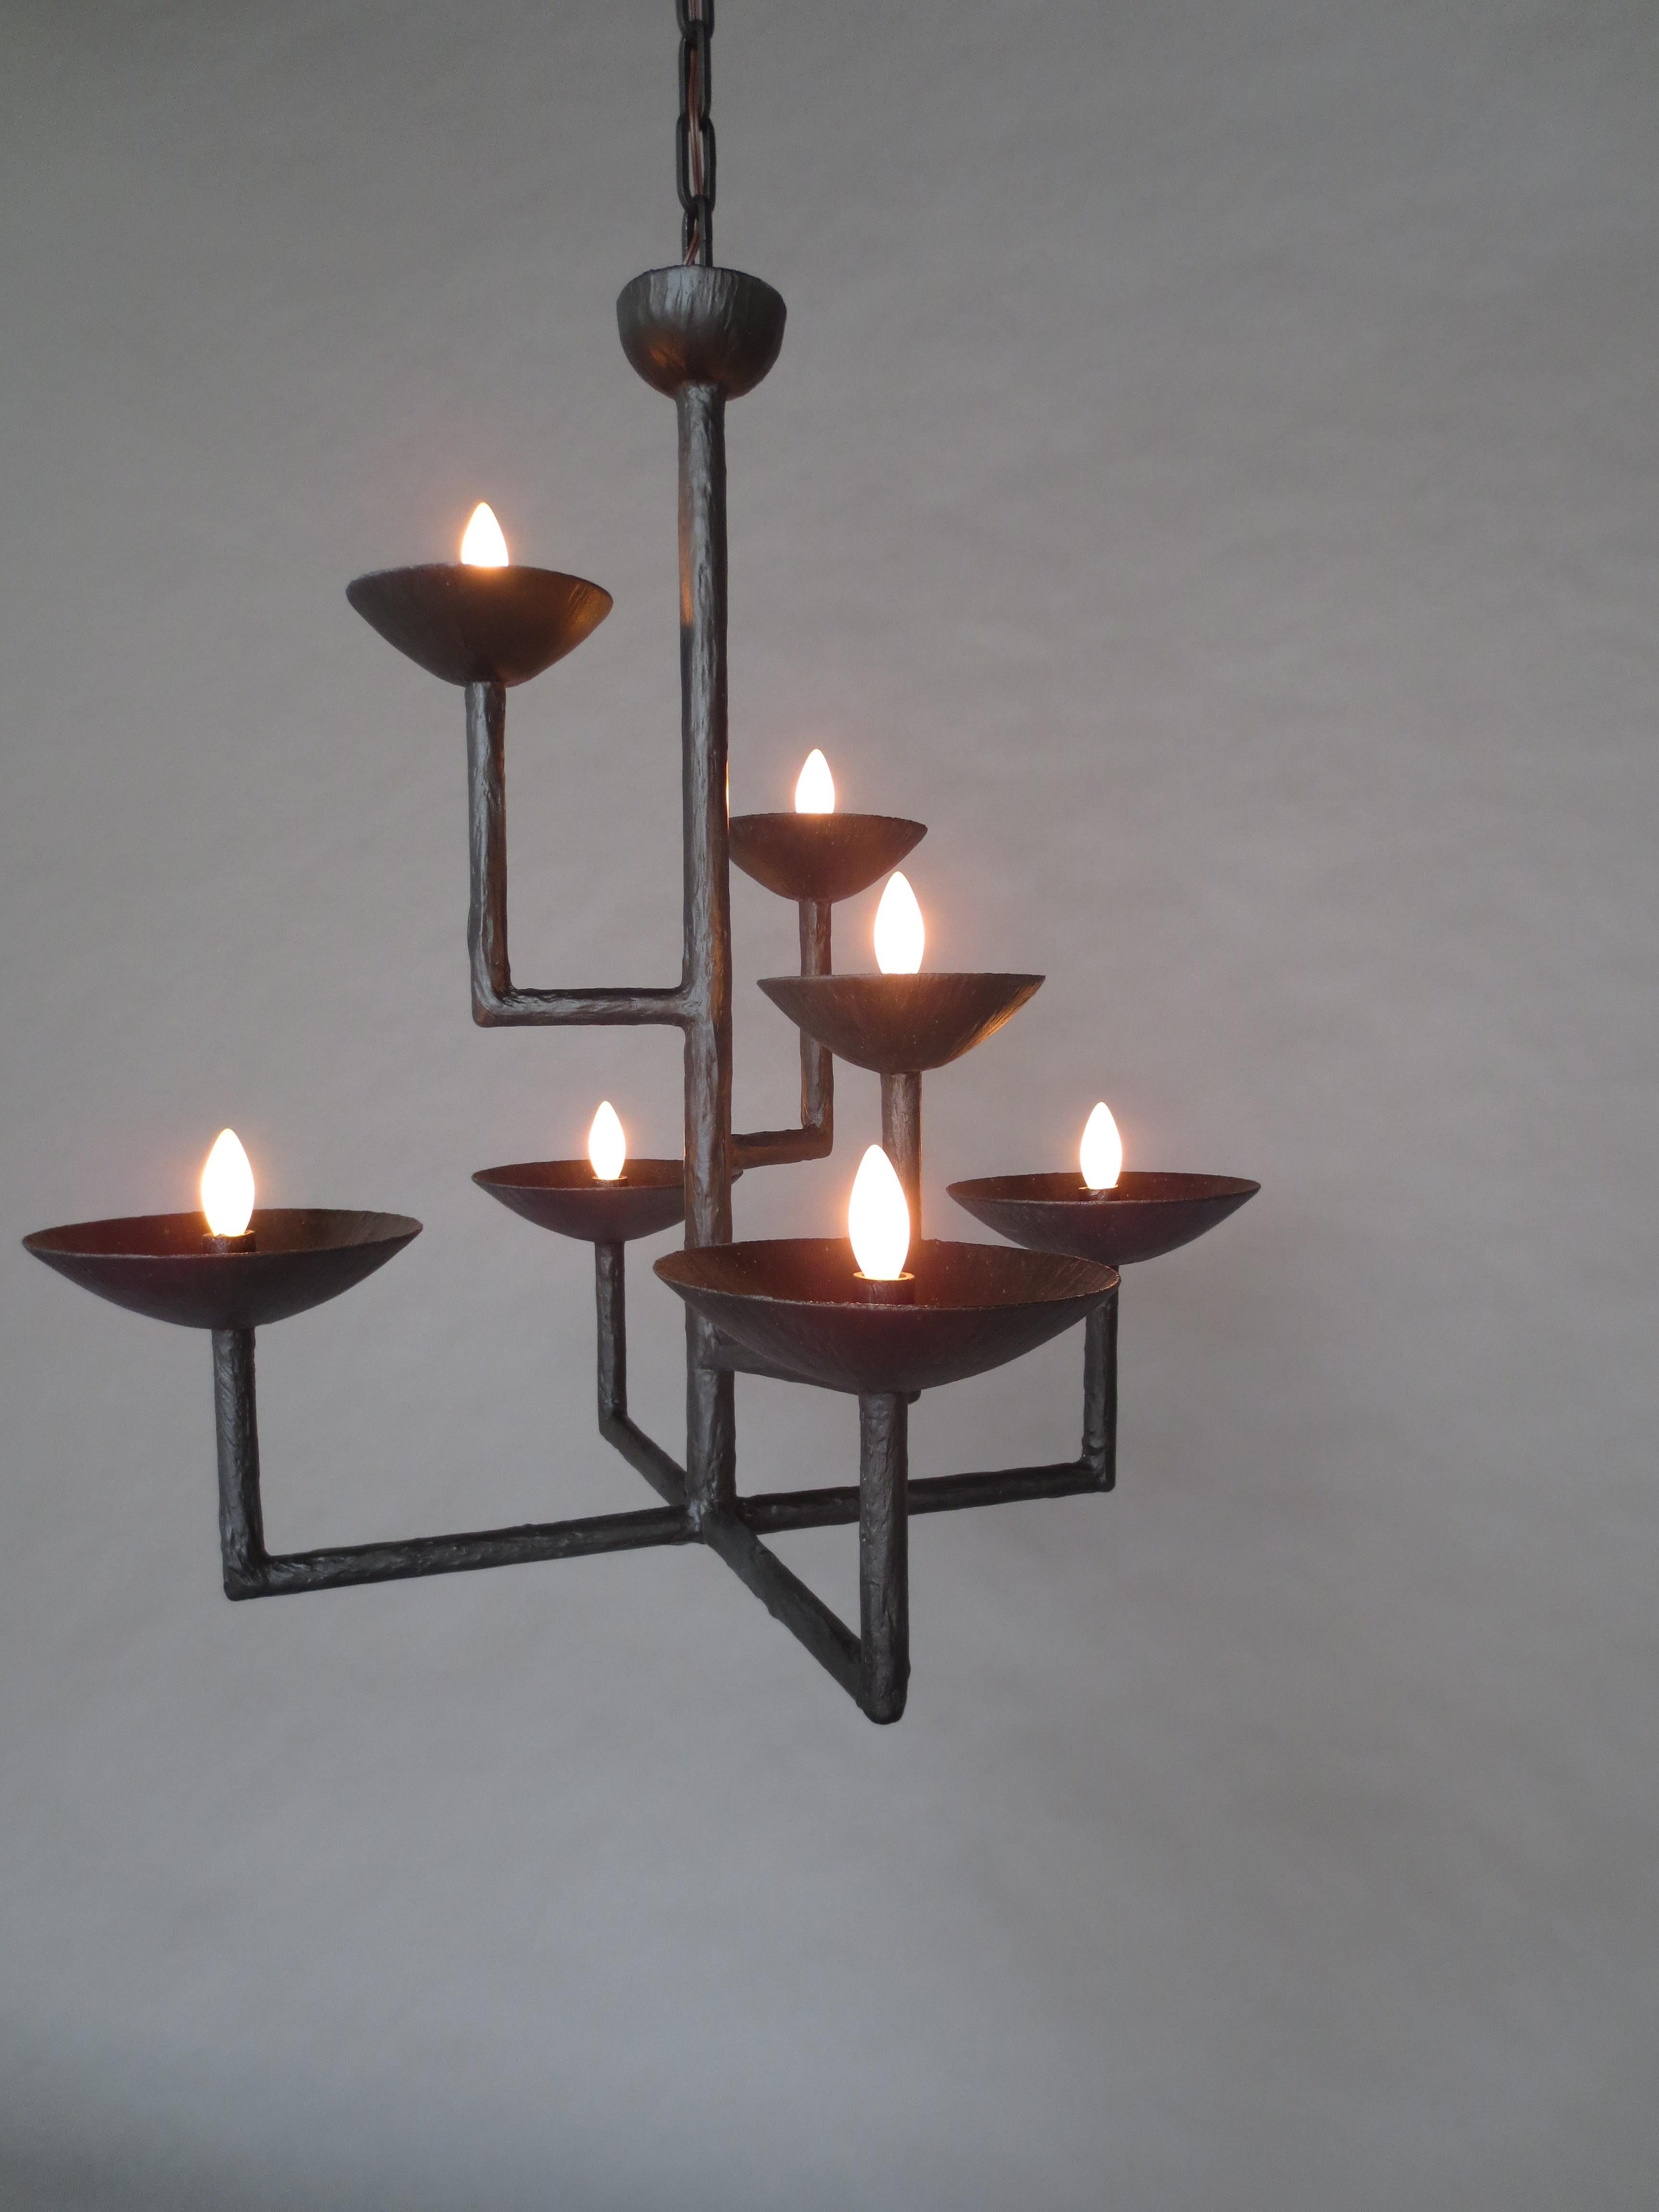 Plaster 7 Cup Bronze Finish Chandelier
Seven cup and seven light square chandelier with L-shaped extended arms. Plaster and steel multi armed chandelier with a bronze enamel finish. May include ball, ceiling cap along with matching chain. These